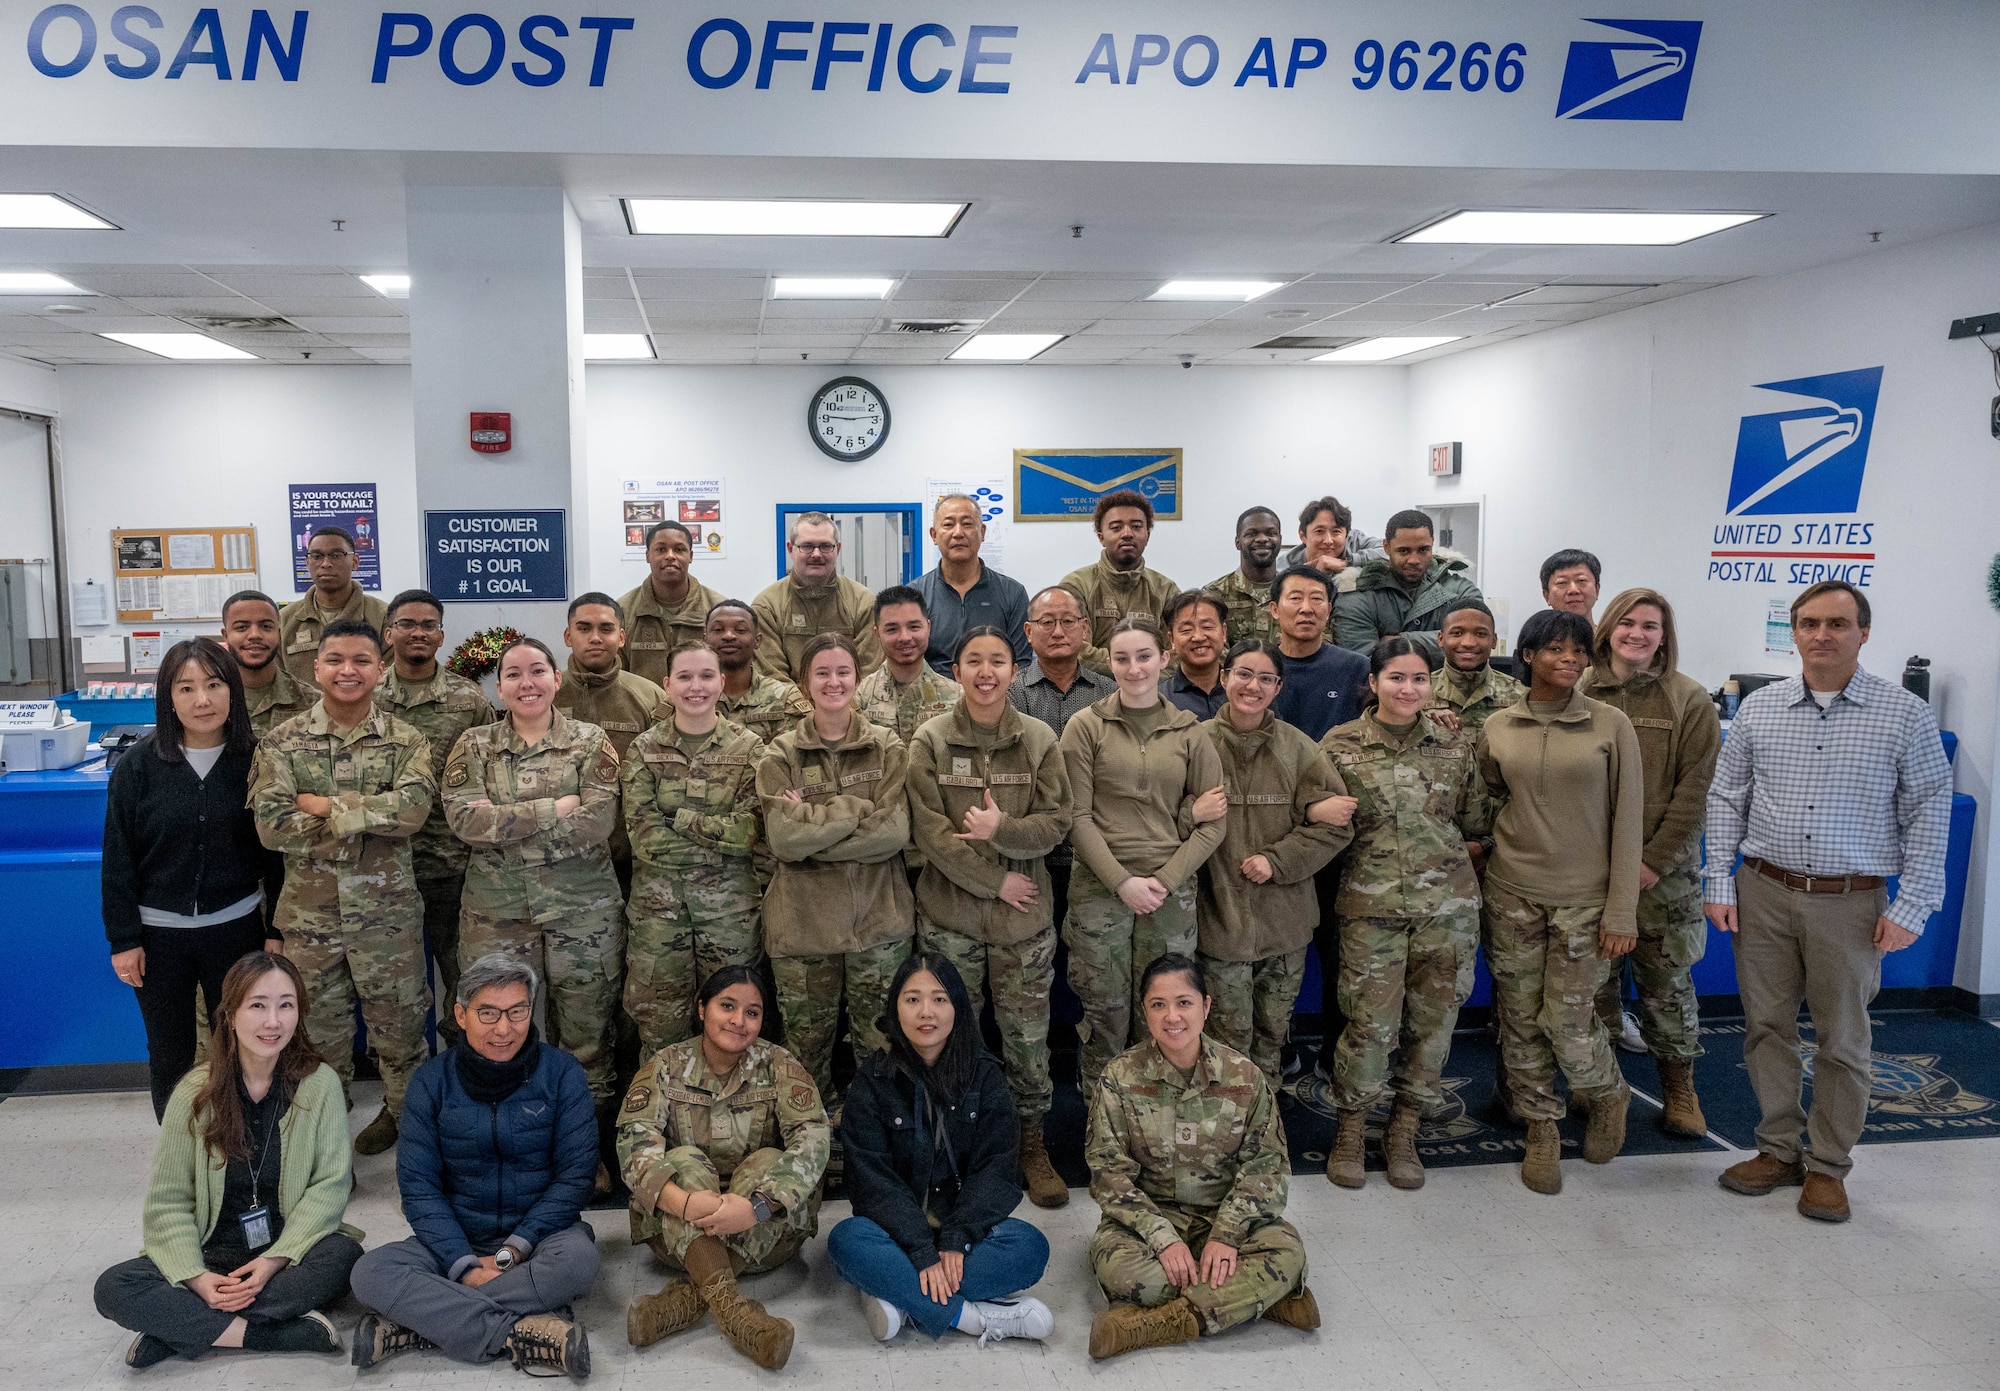 Members from the Osan Air Base Post Office pose for a group photo at Osan Air Base, Dec. 12, 2023. The base post office operates with a total of 40 personnel, including 28 military, 12 Korean Nationals, and one GS civilian to handle all of the incoming and outgoing mail for the base. The post office provides numerous options to the Airmen on base who might need specific services like placing mail on hold while away or appointing someone trusted to pick up mail on their behalf. (U.S. Air Force photo by Airman 1st Class Chase Verzaal)